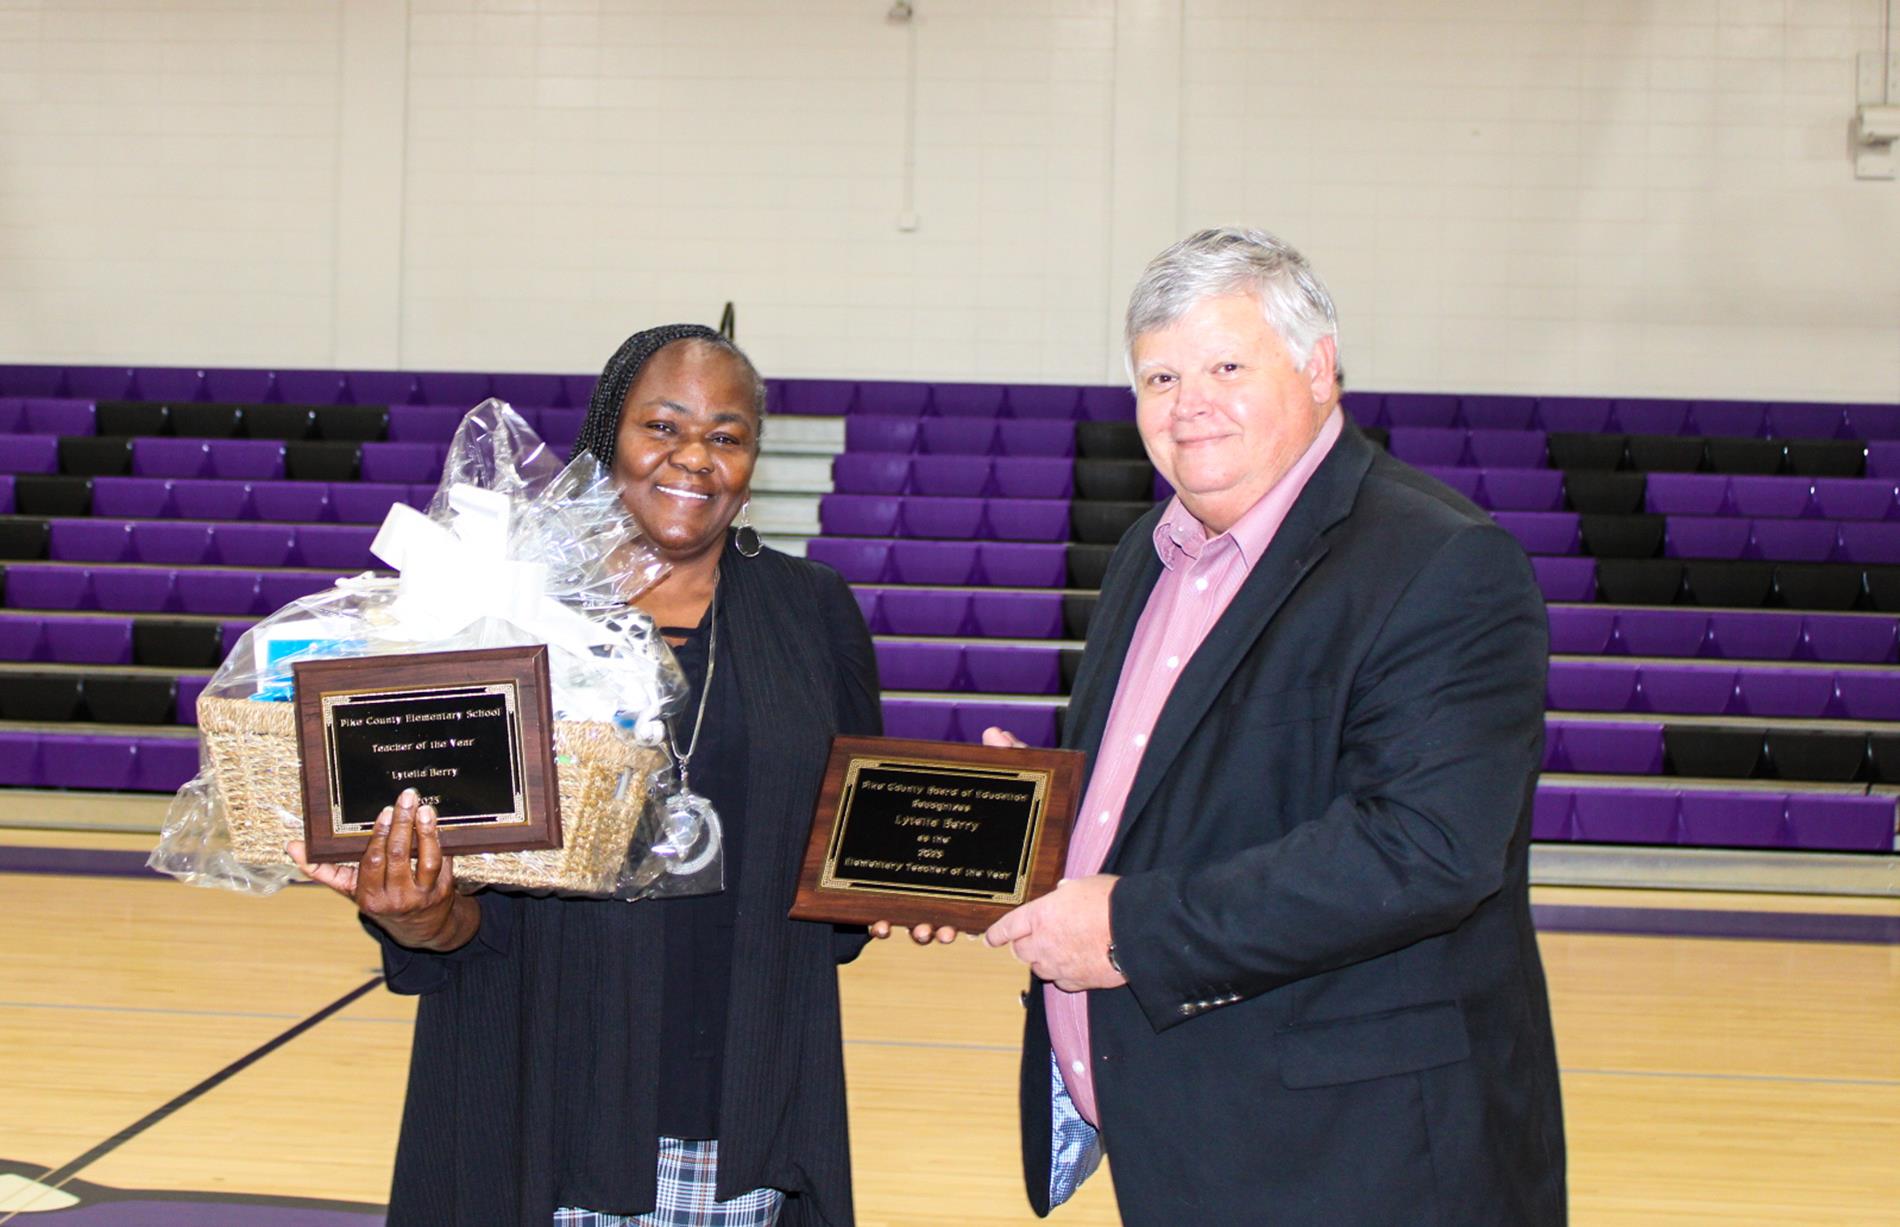 Ms. Berry was named Overall Elementary Teacher of the Year